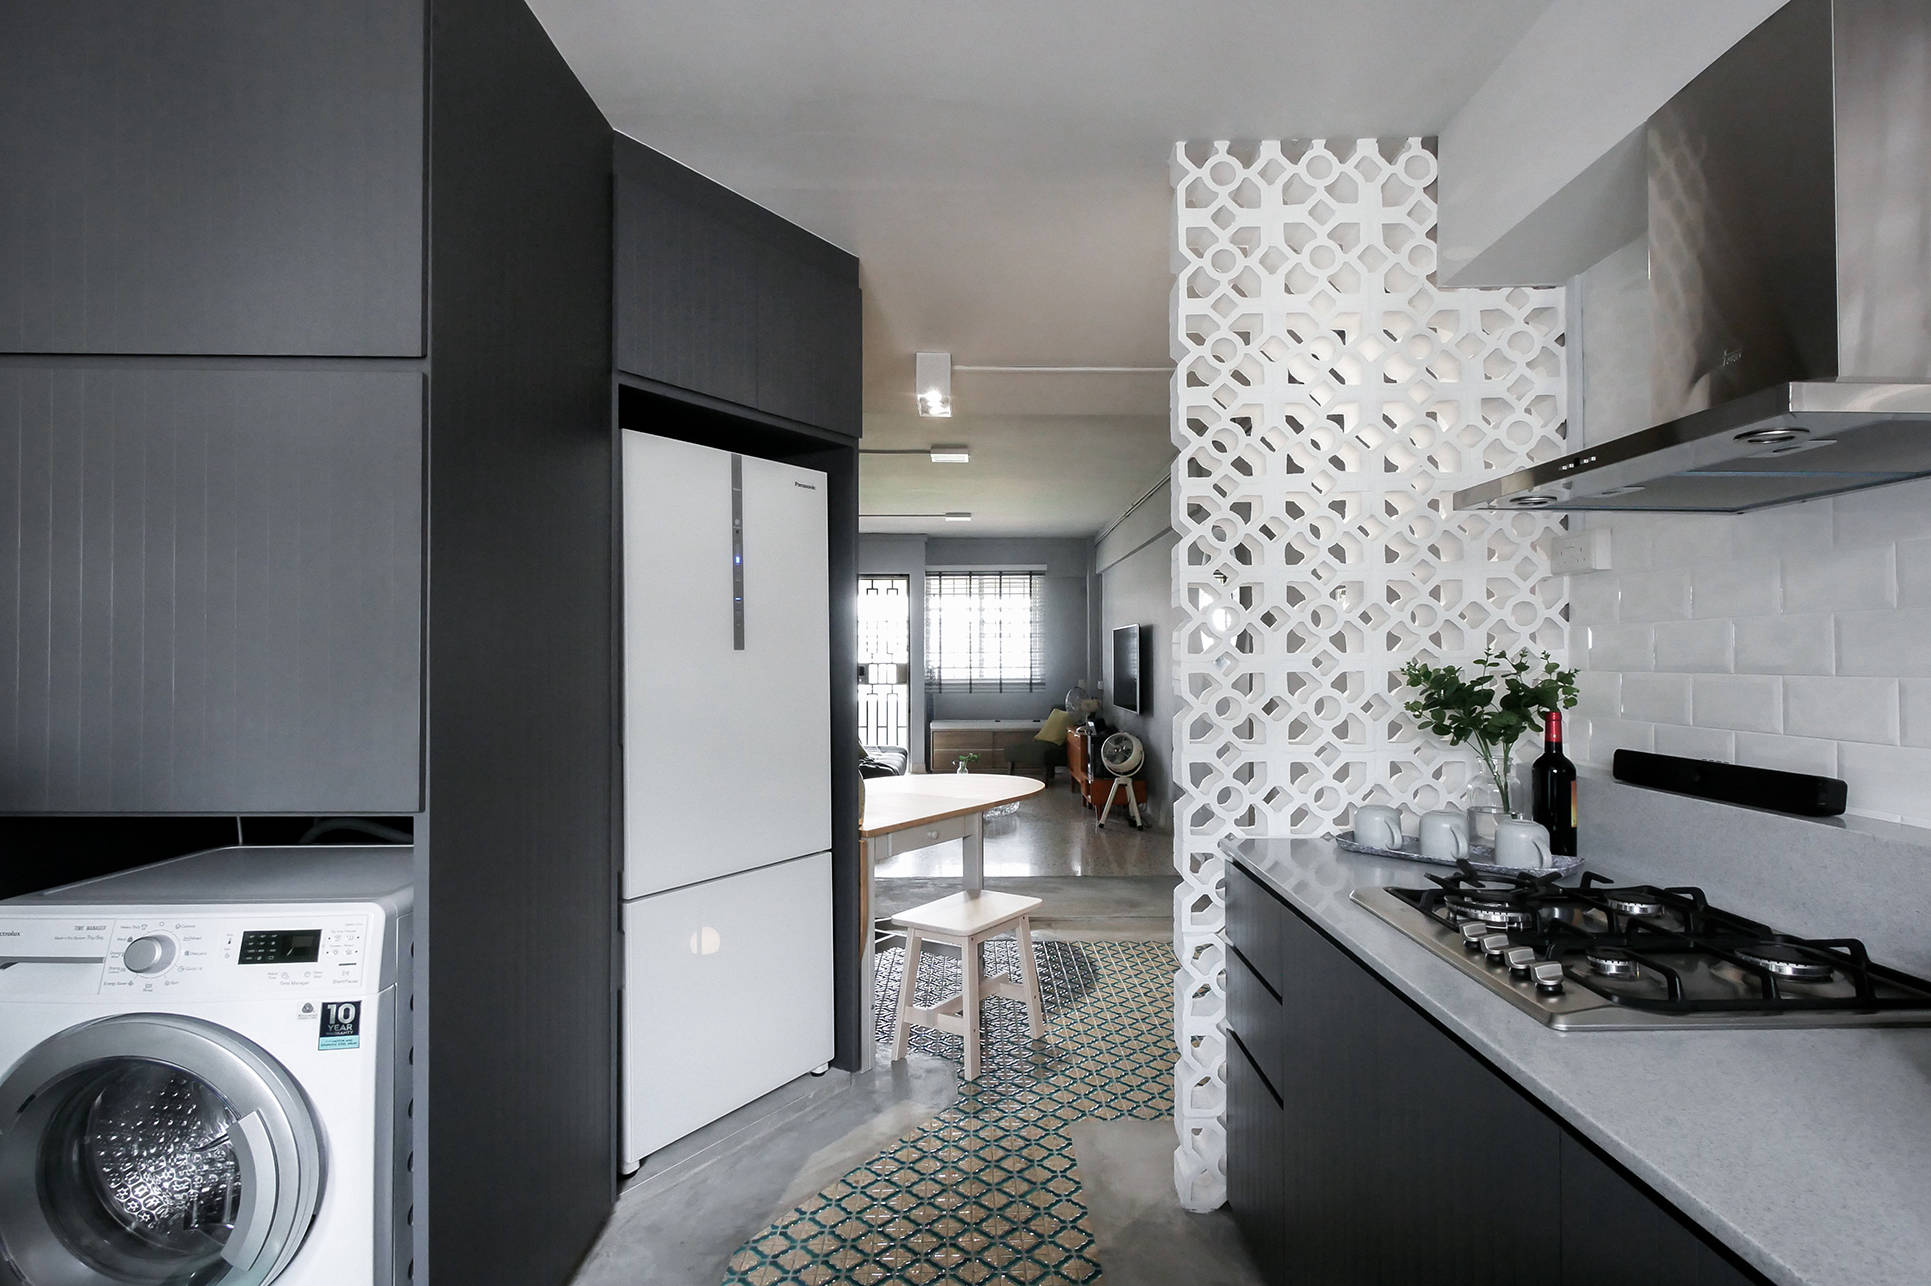 This 3-room HDB flat is both contemporary and nostalgic | Lookboxliving